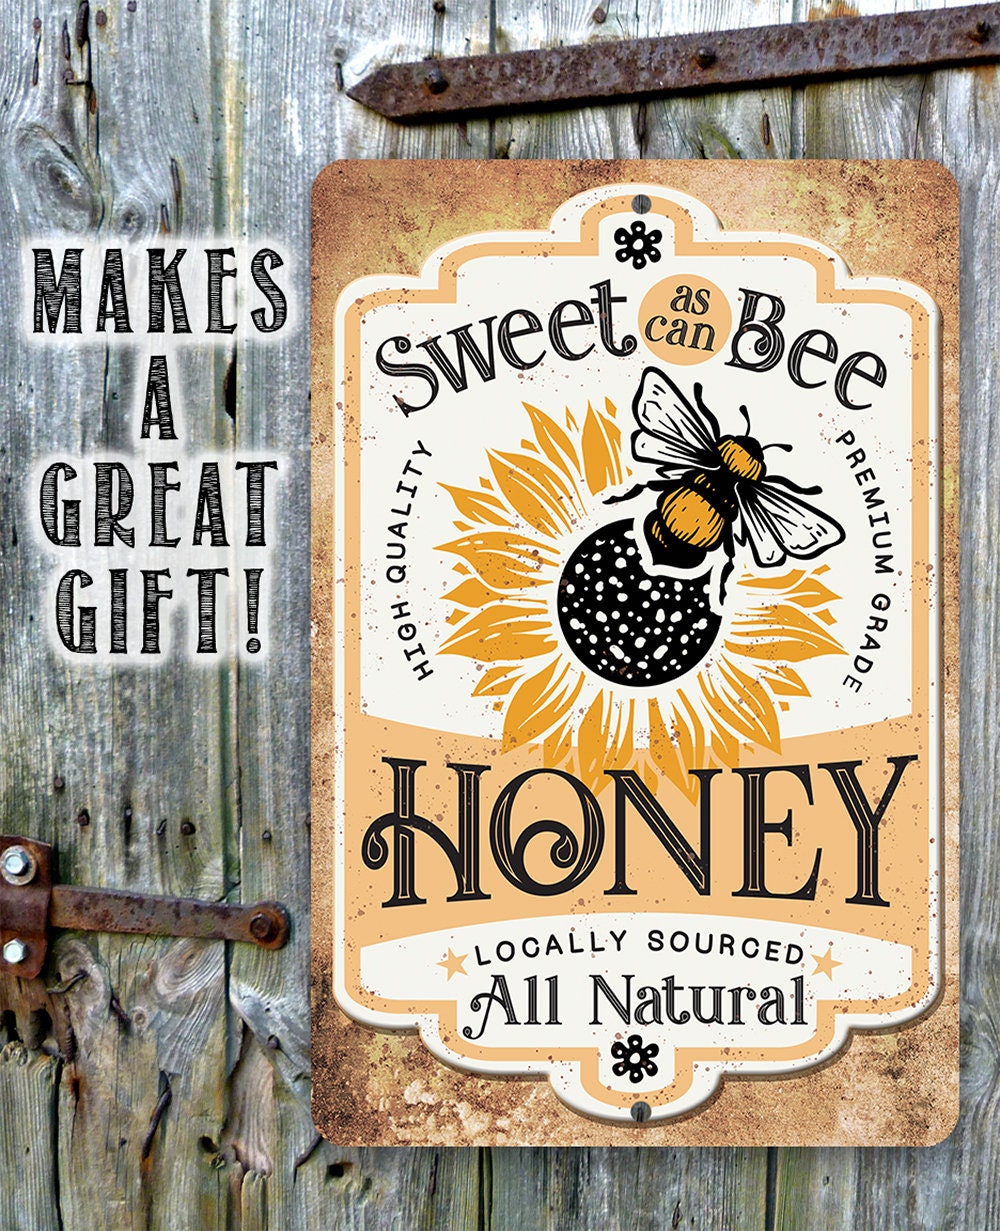 Sweet As Can Bee, Honey Locally Sourced 8" x 12" or 12" x 18" Aluminum Tin Awesome Metal Poster Lone Star Art 